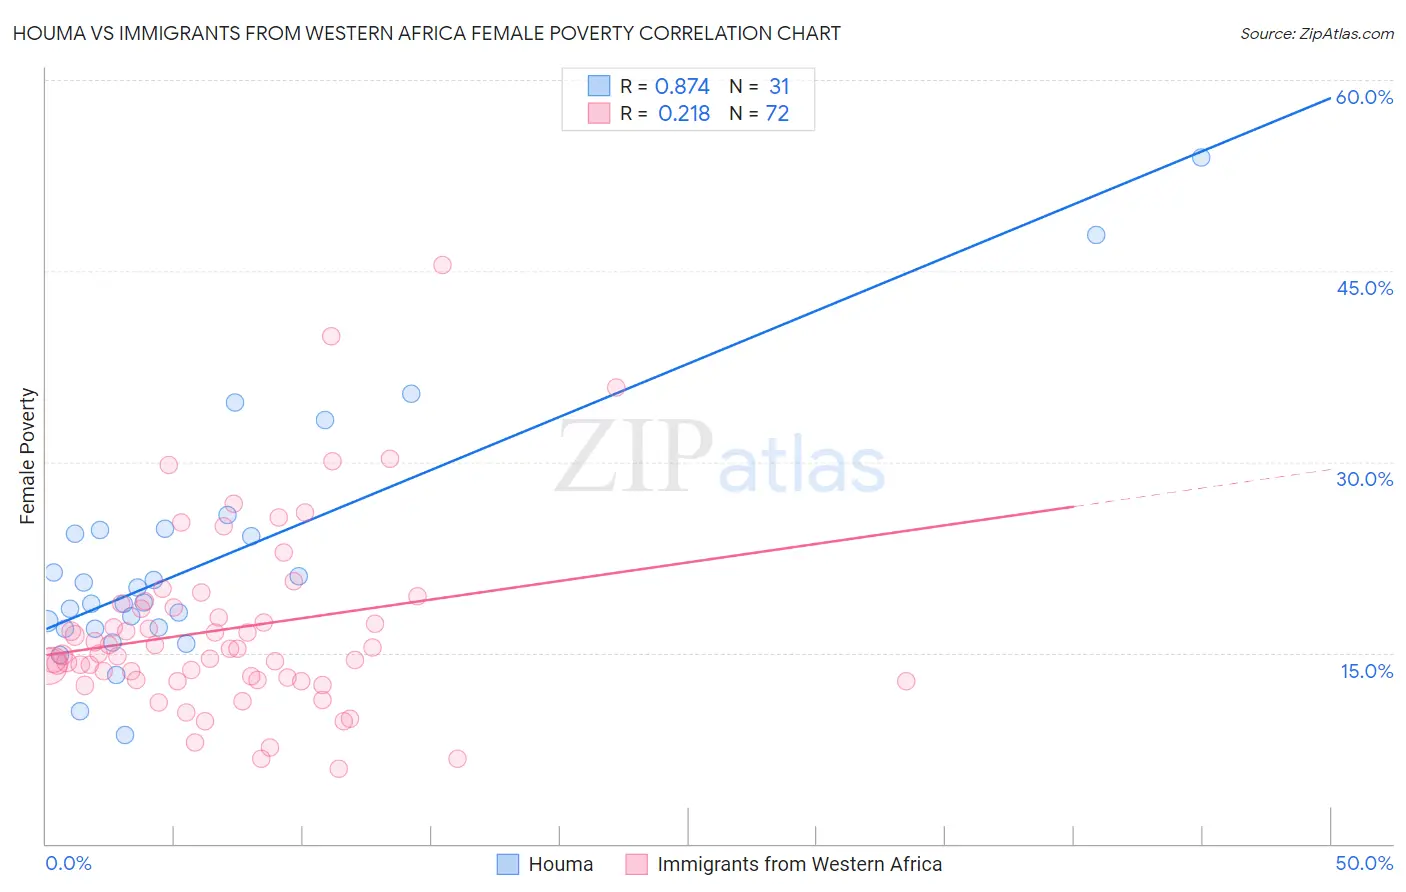 Houma vs Immigrants from Western Africa Female Poverty